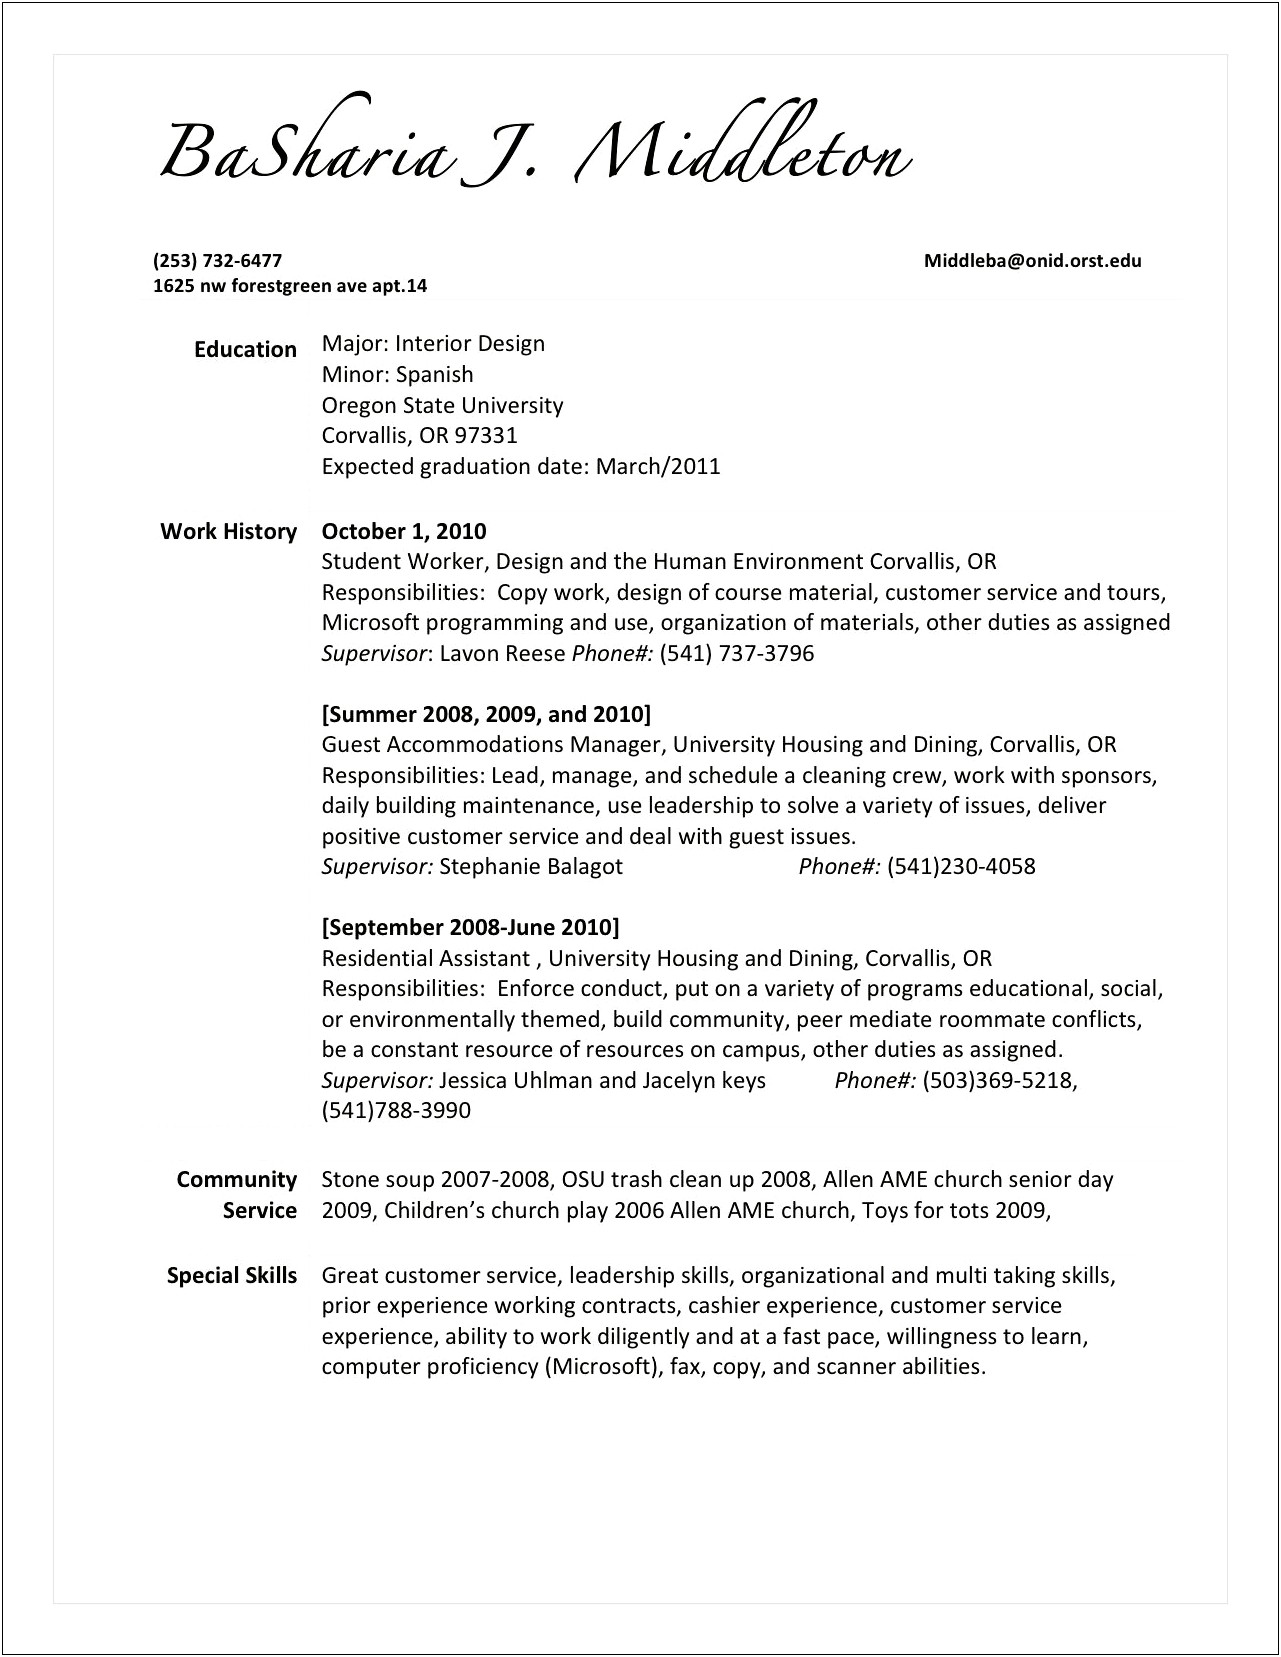 Where To Put Community Services In Resume